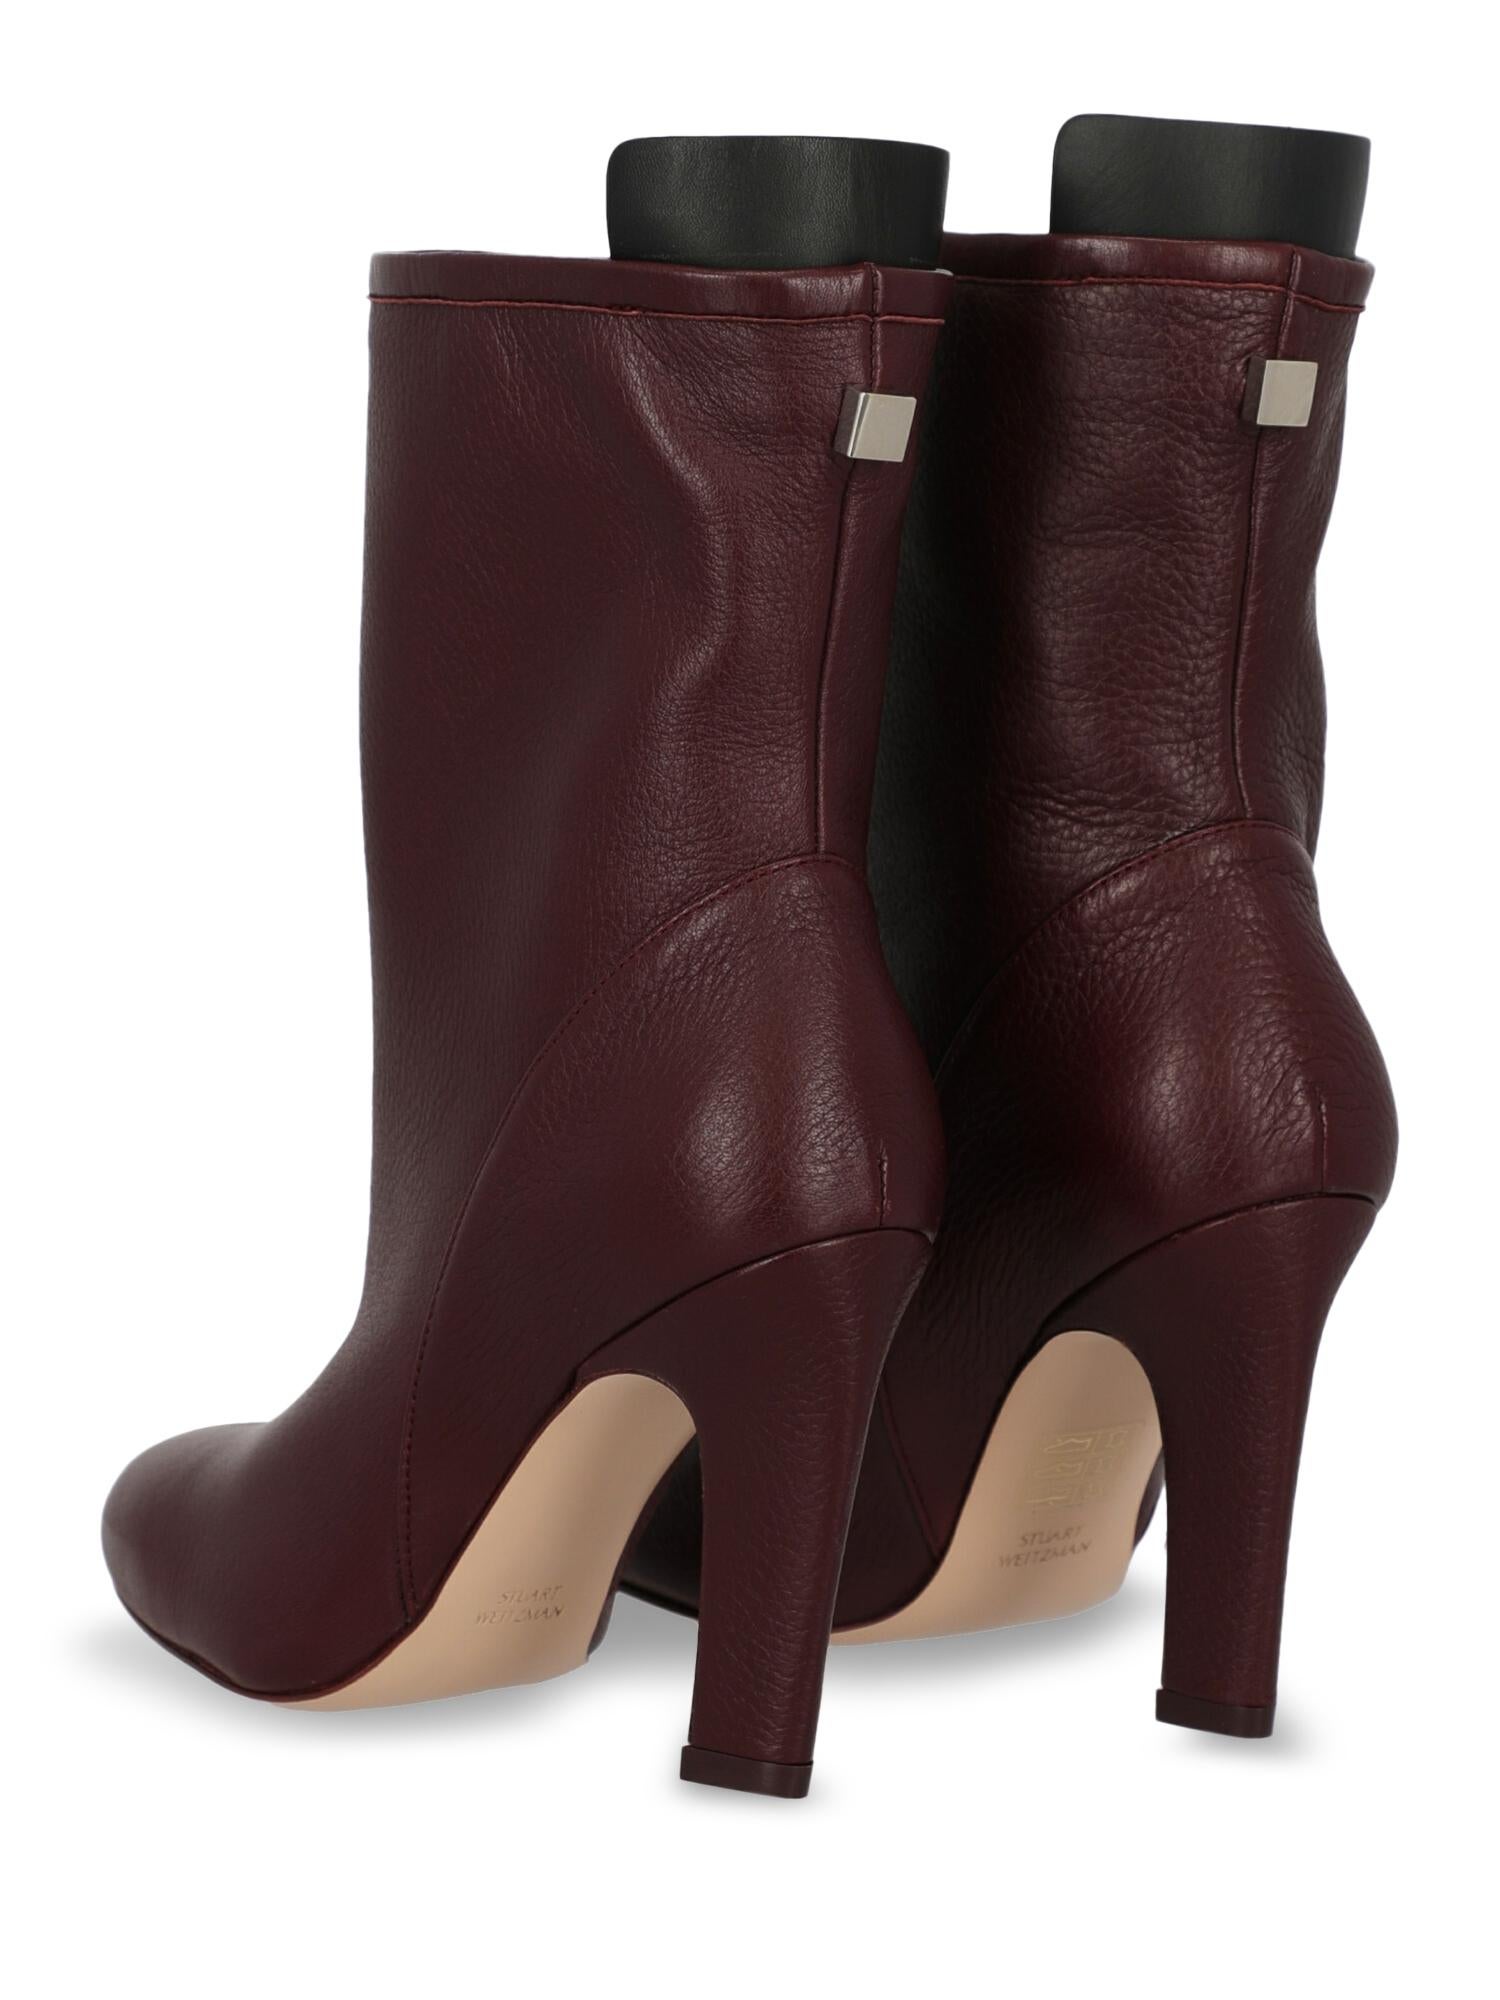 burgandy leather boots